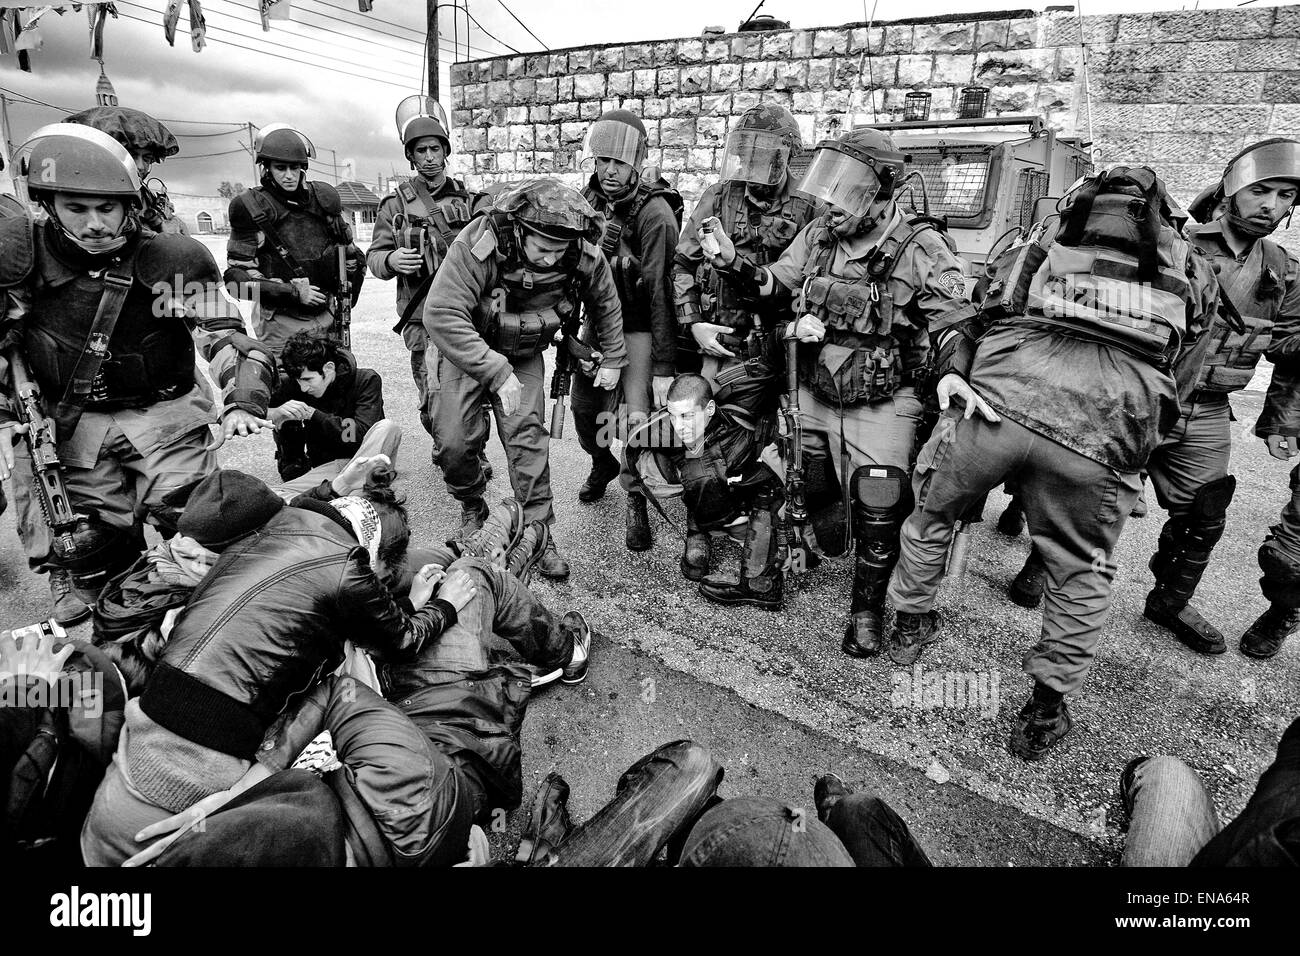 Palestine. 25th Mar, 2011. A group of international activists are arrested, triggering mayhem in the village of Nabi Saleh. During the melee, Israeli forces used tear gas, concussion grenades and pepper spray to regain control. Mar. 25, 2011. West Bank, Palestine. © Gabriel Romero/ZUMA Wire/Alamy Live News Stock Photo